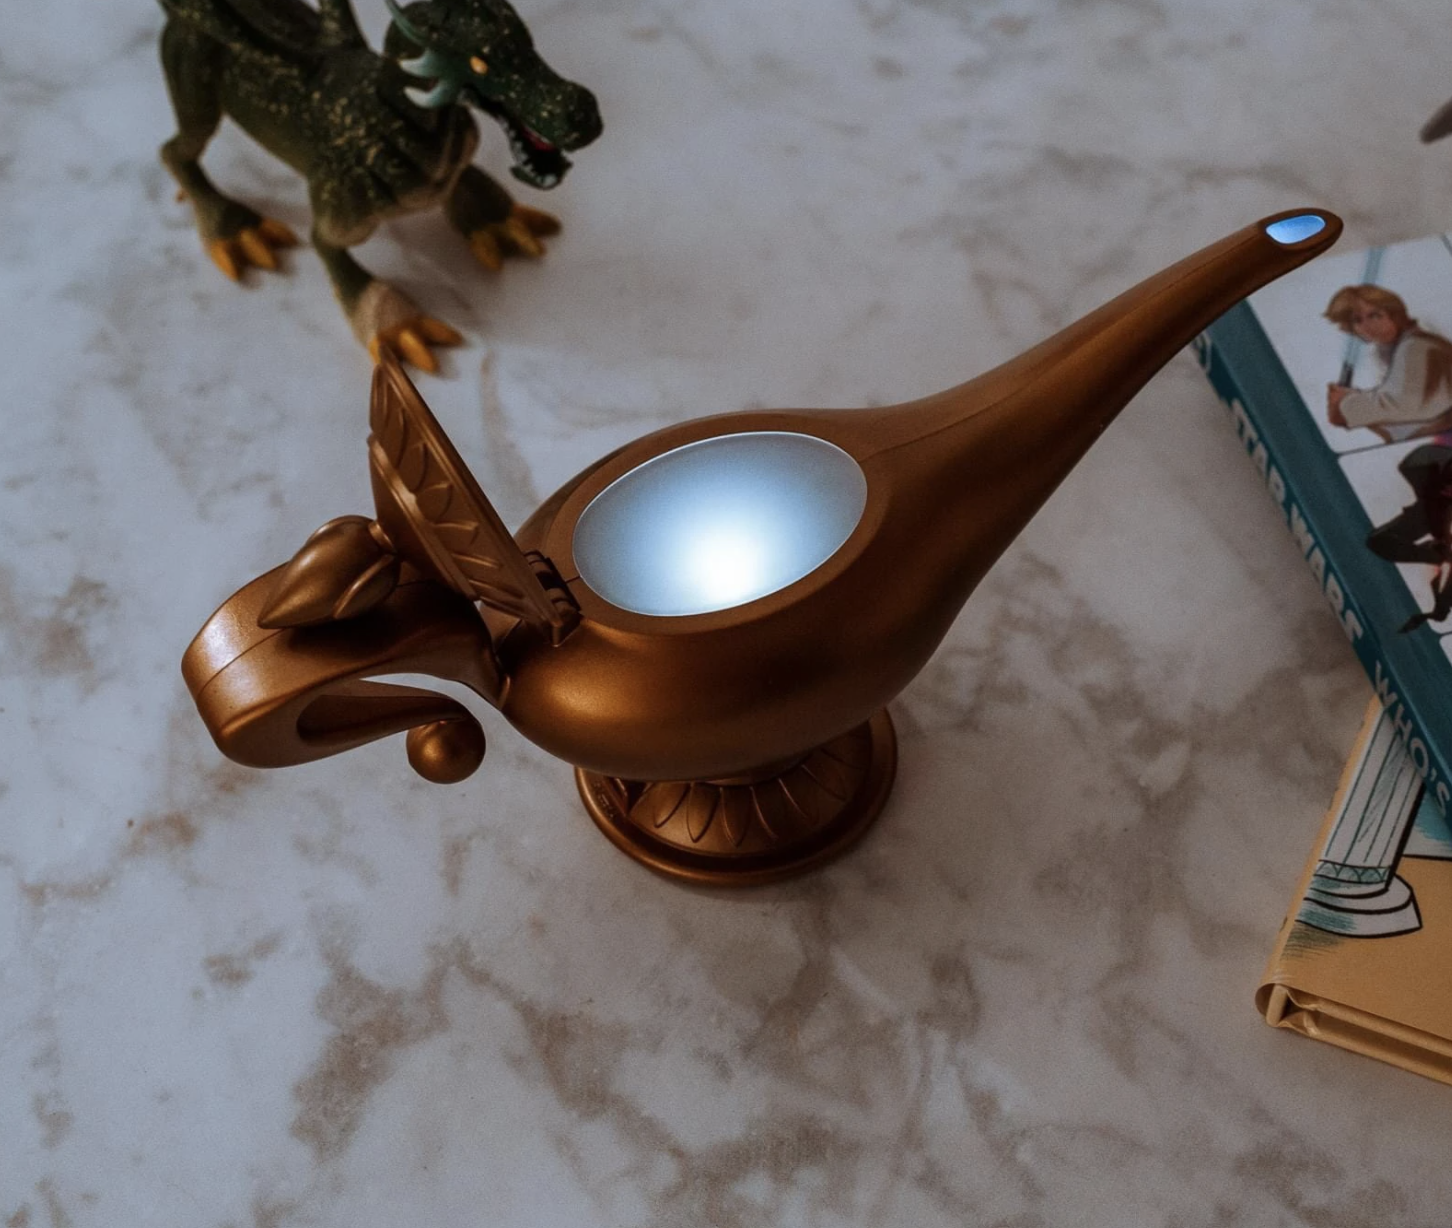 The magic lamp shaped light, which glows from the inside